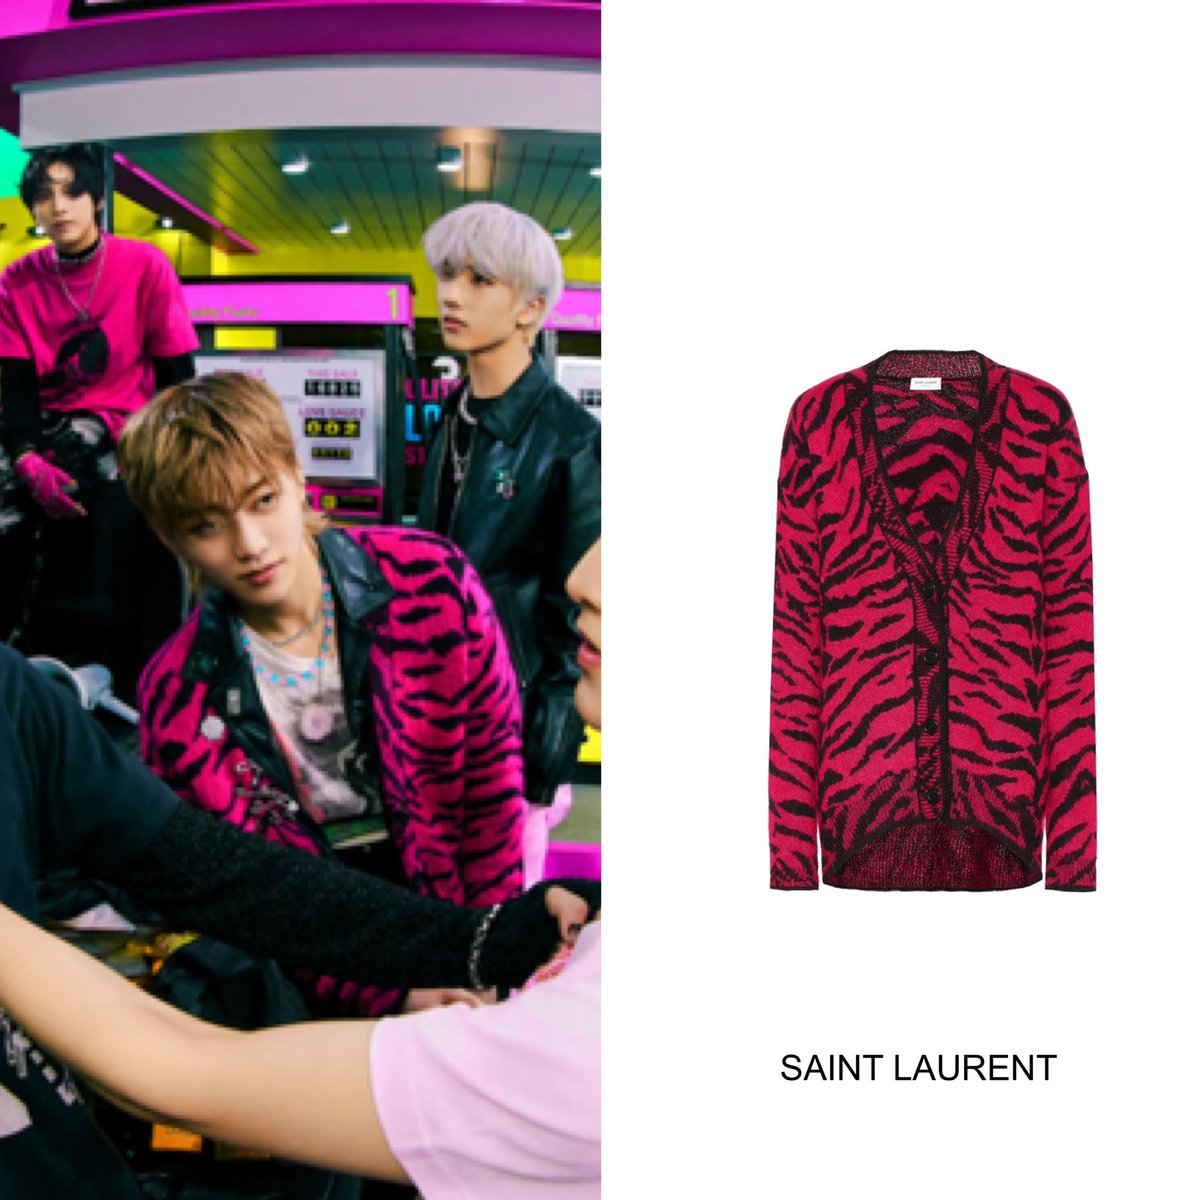 NCT_OUTFIT on X: #NCTOUTFIT Glitch Mode Teaser Jaemin in Louis Vuitton  SPORTY T-SHIRT WITH PATCH #NCT #NCTDREAM #NCTDREAM_GlitchMode #JAEMIN #재민   / X